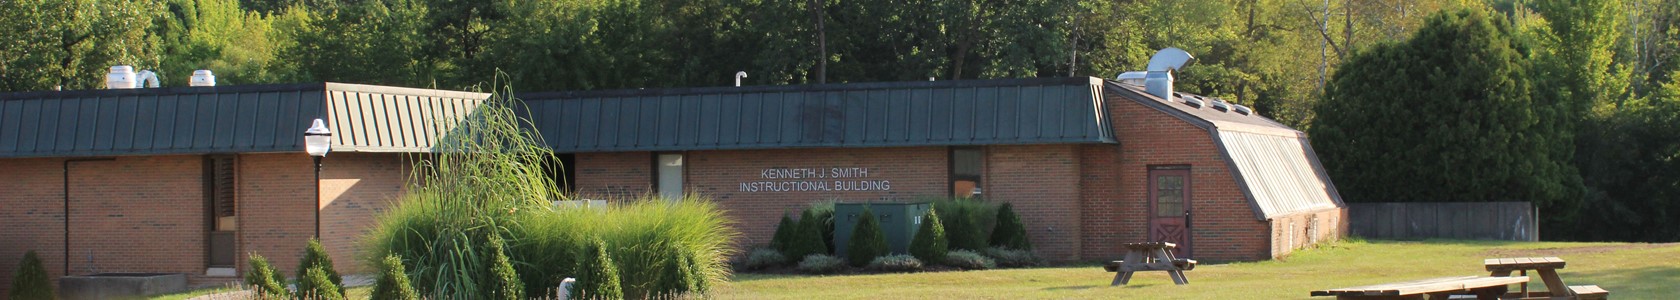 ɫ's Sidney campus, Kenneth J. Smith Instructional Building